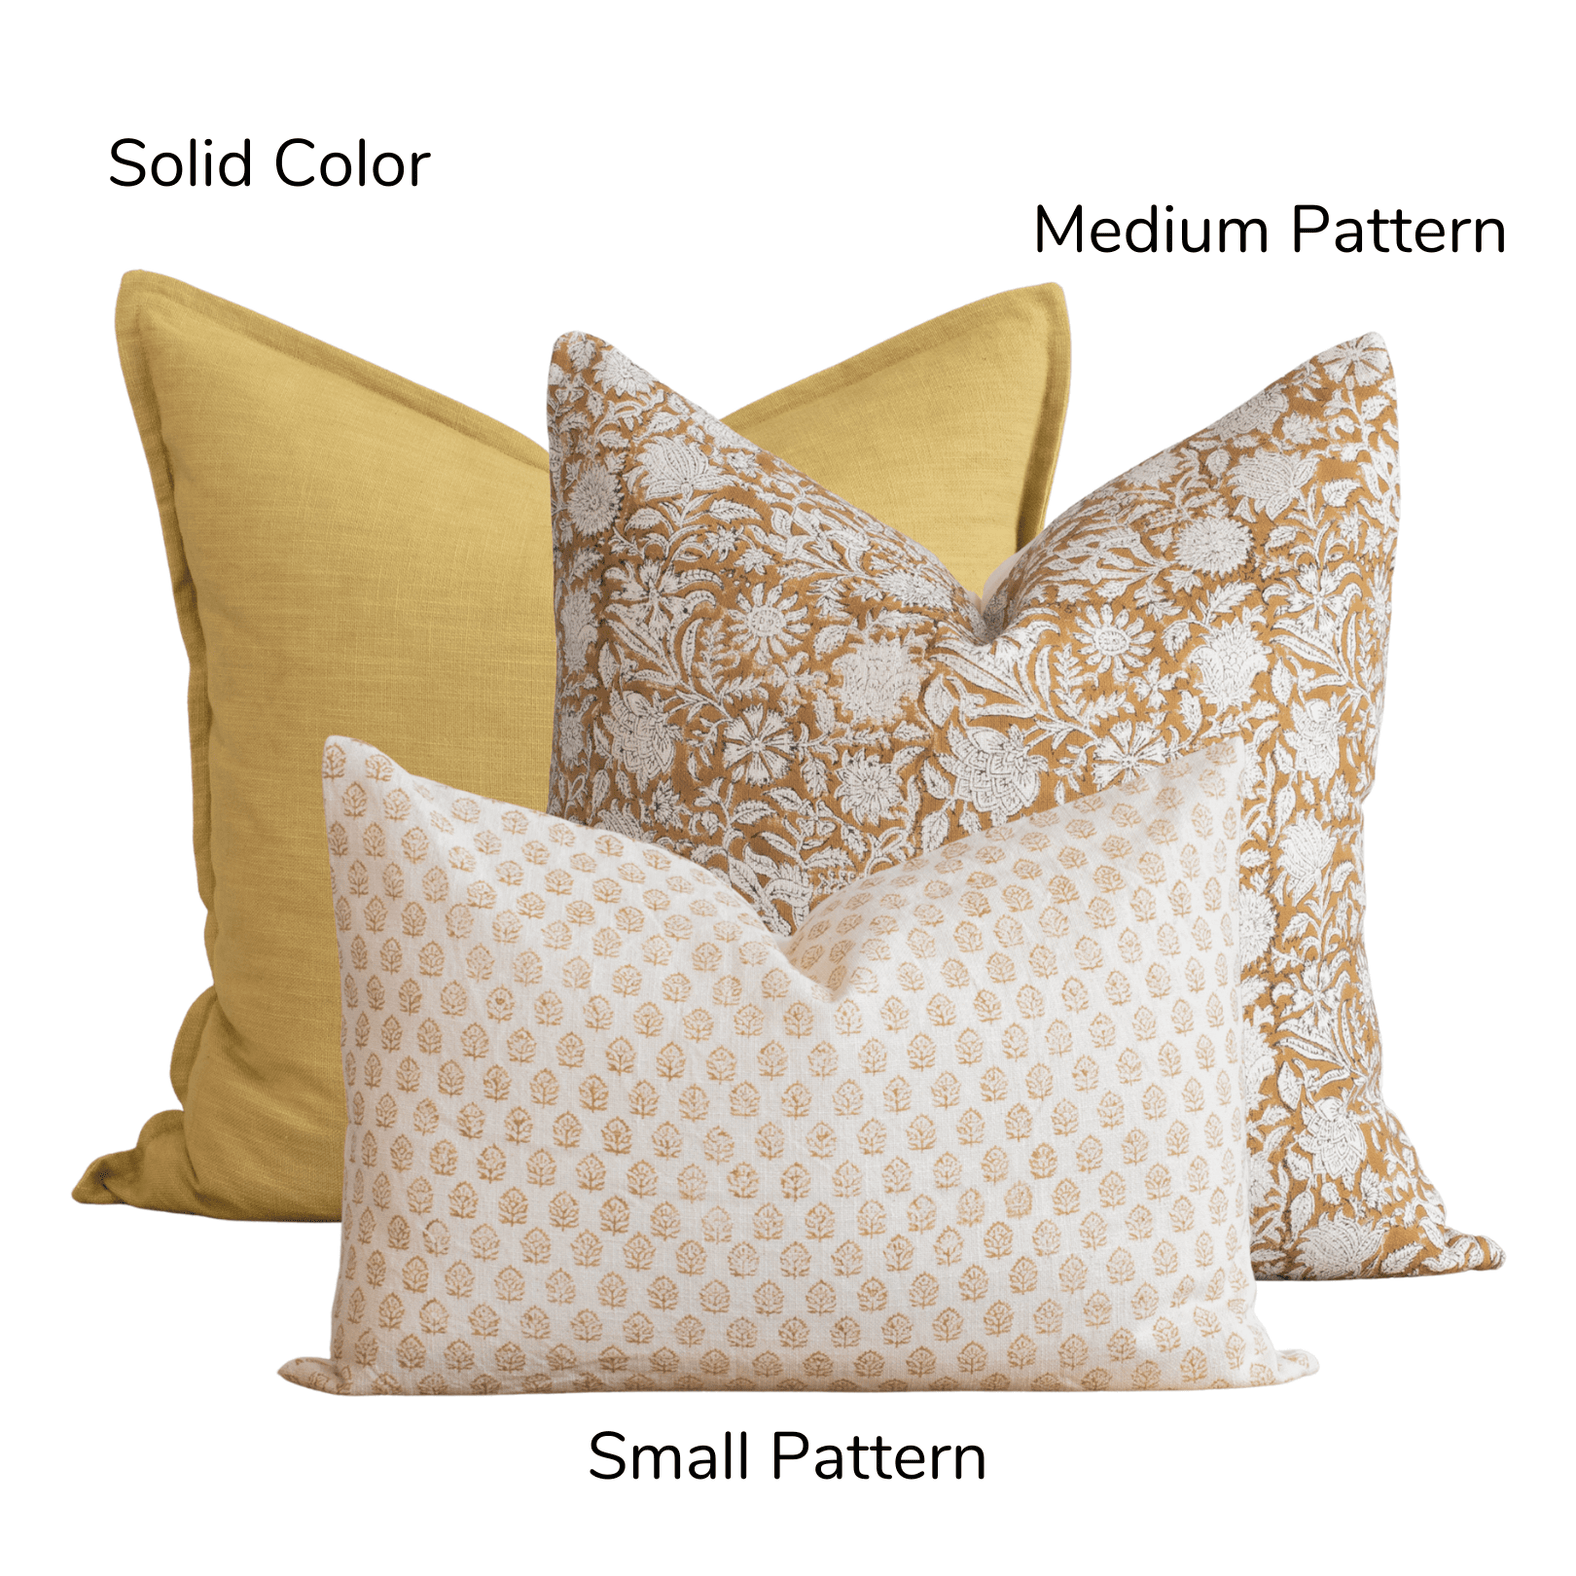 Pillow Combinations